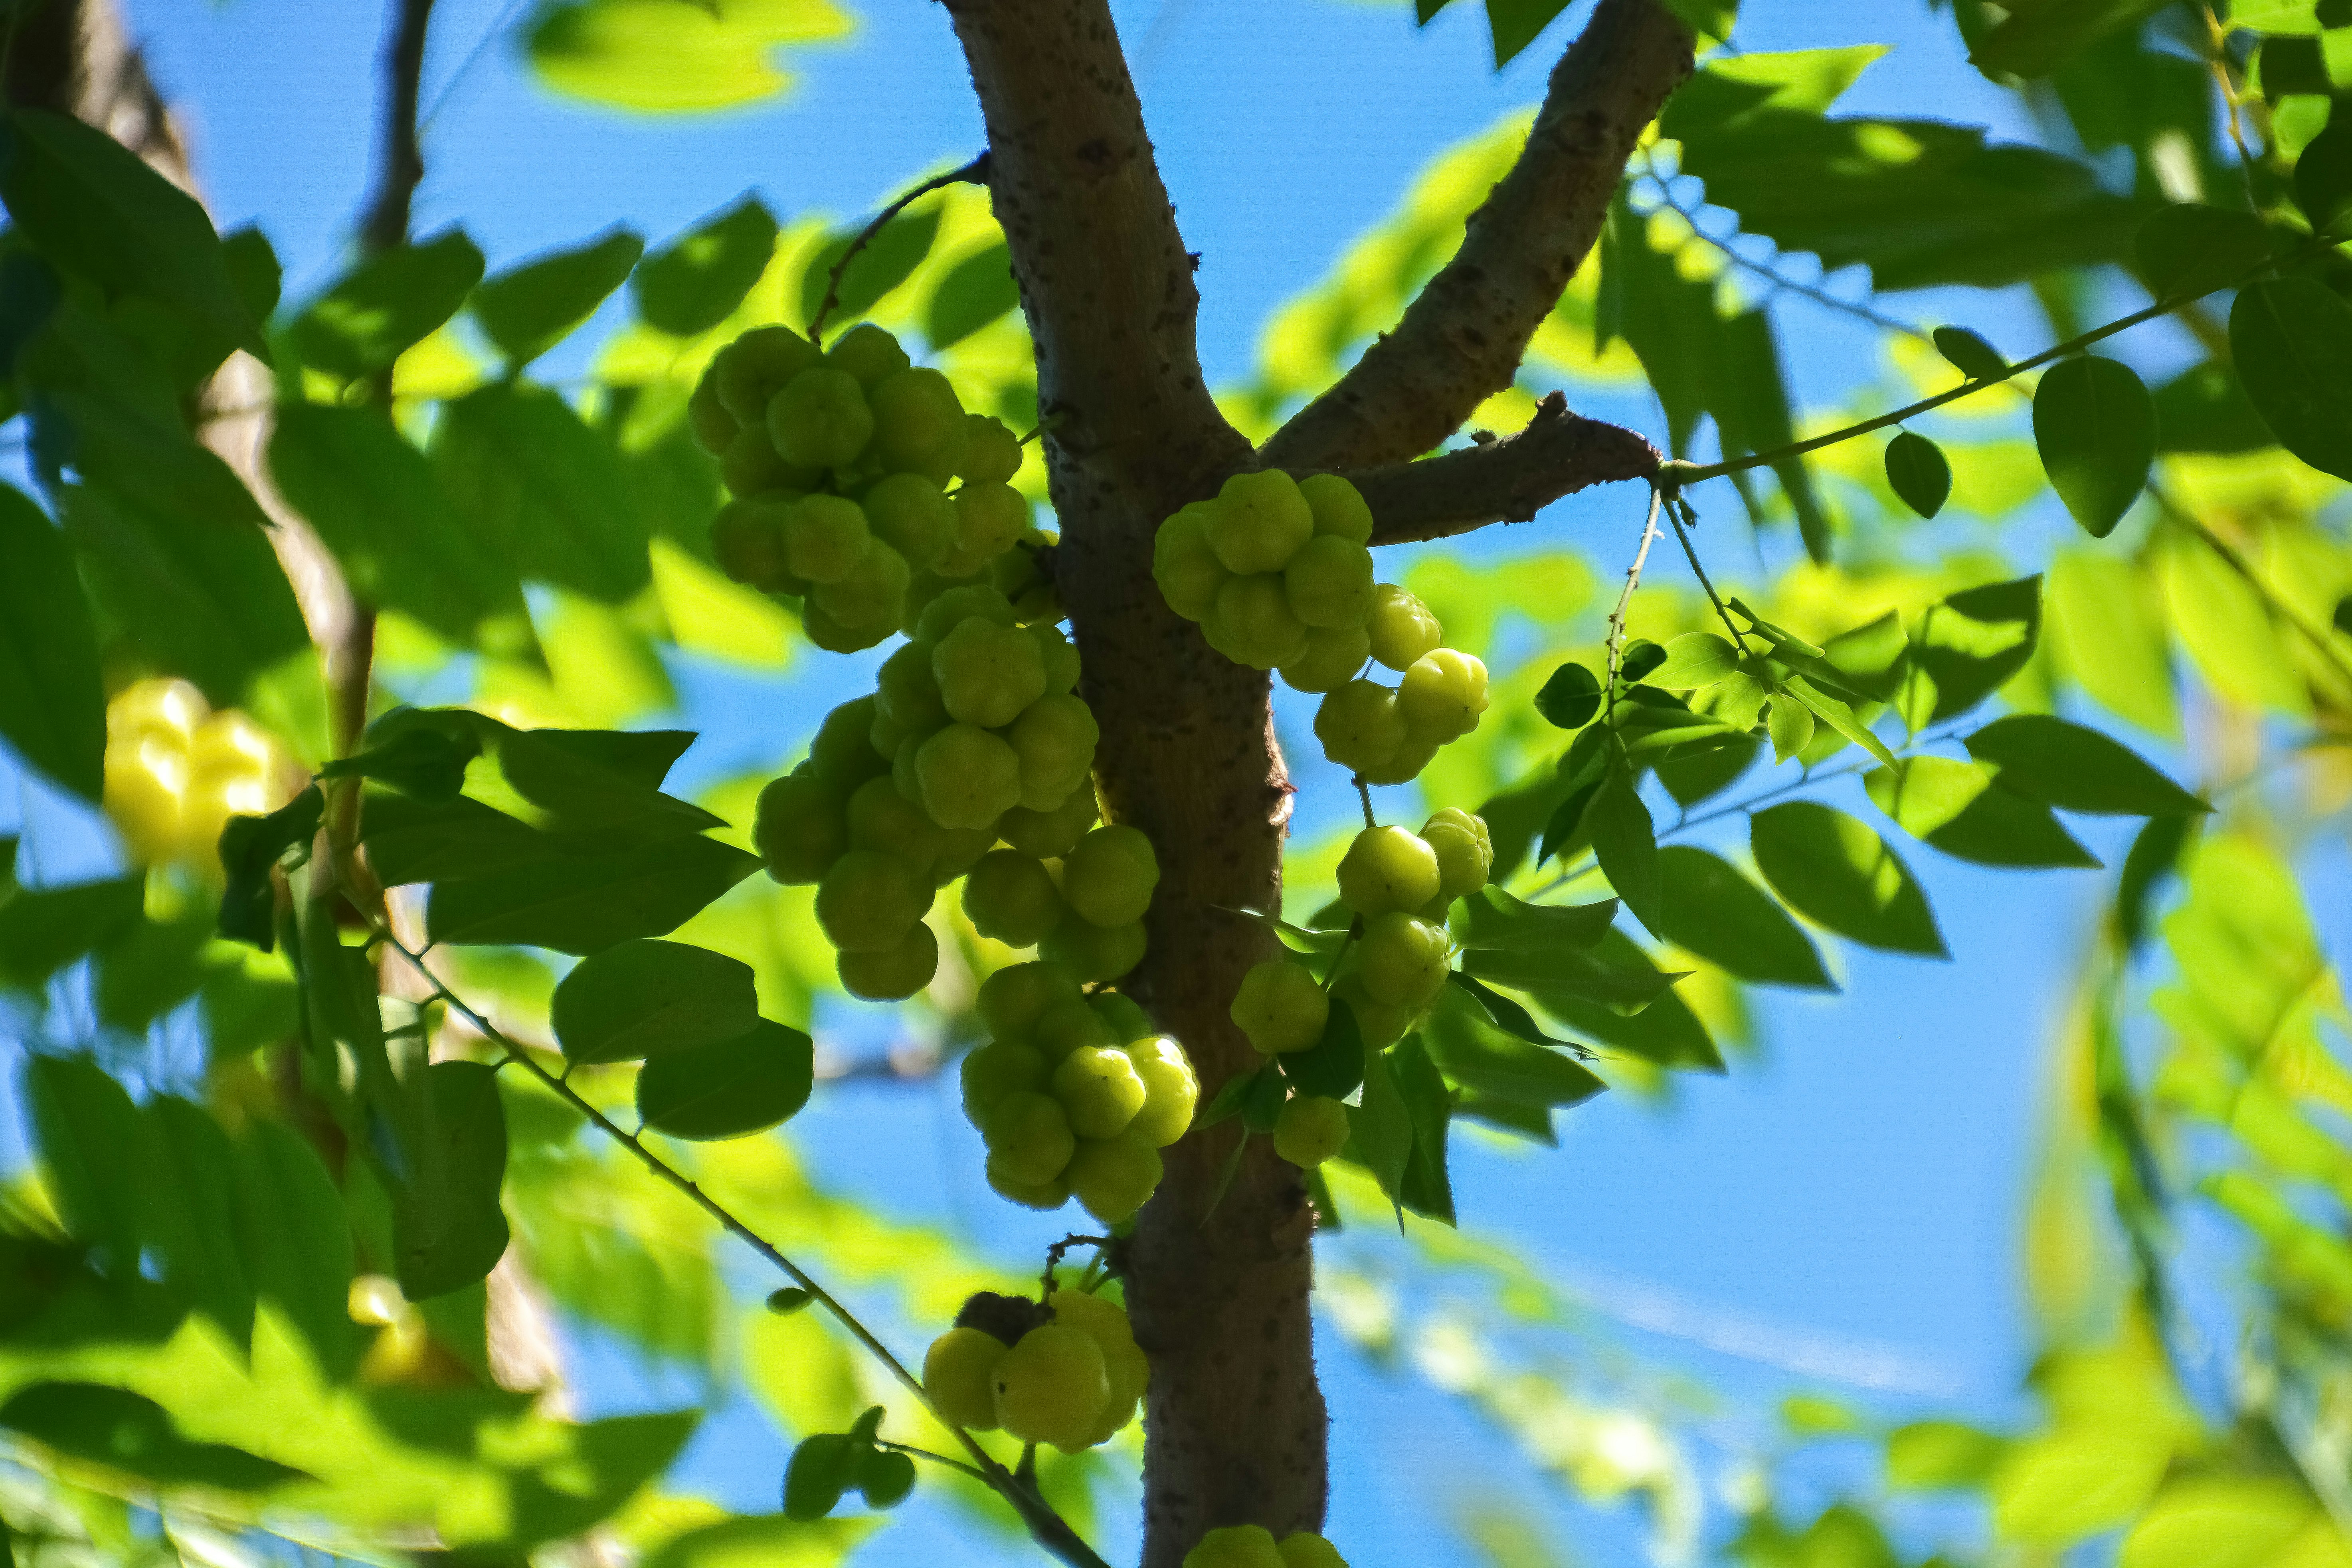 green grapes on tree during daytime